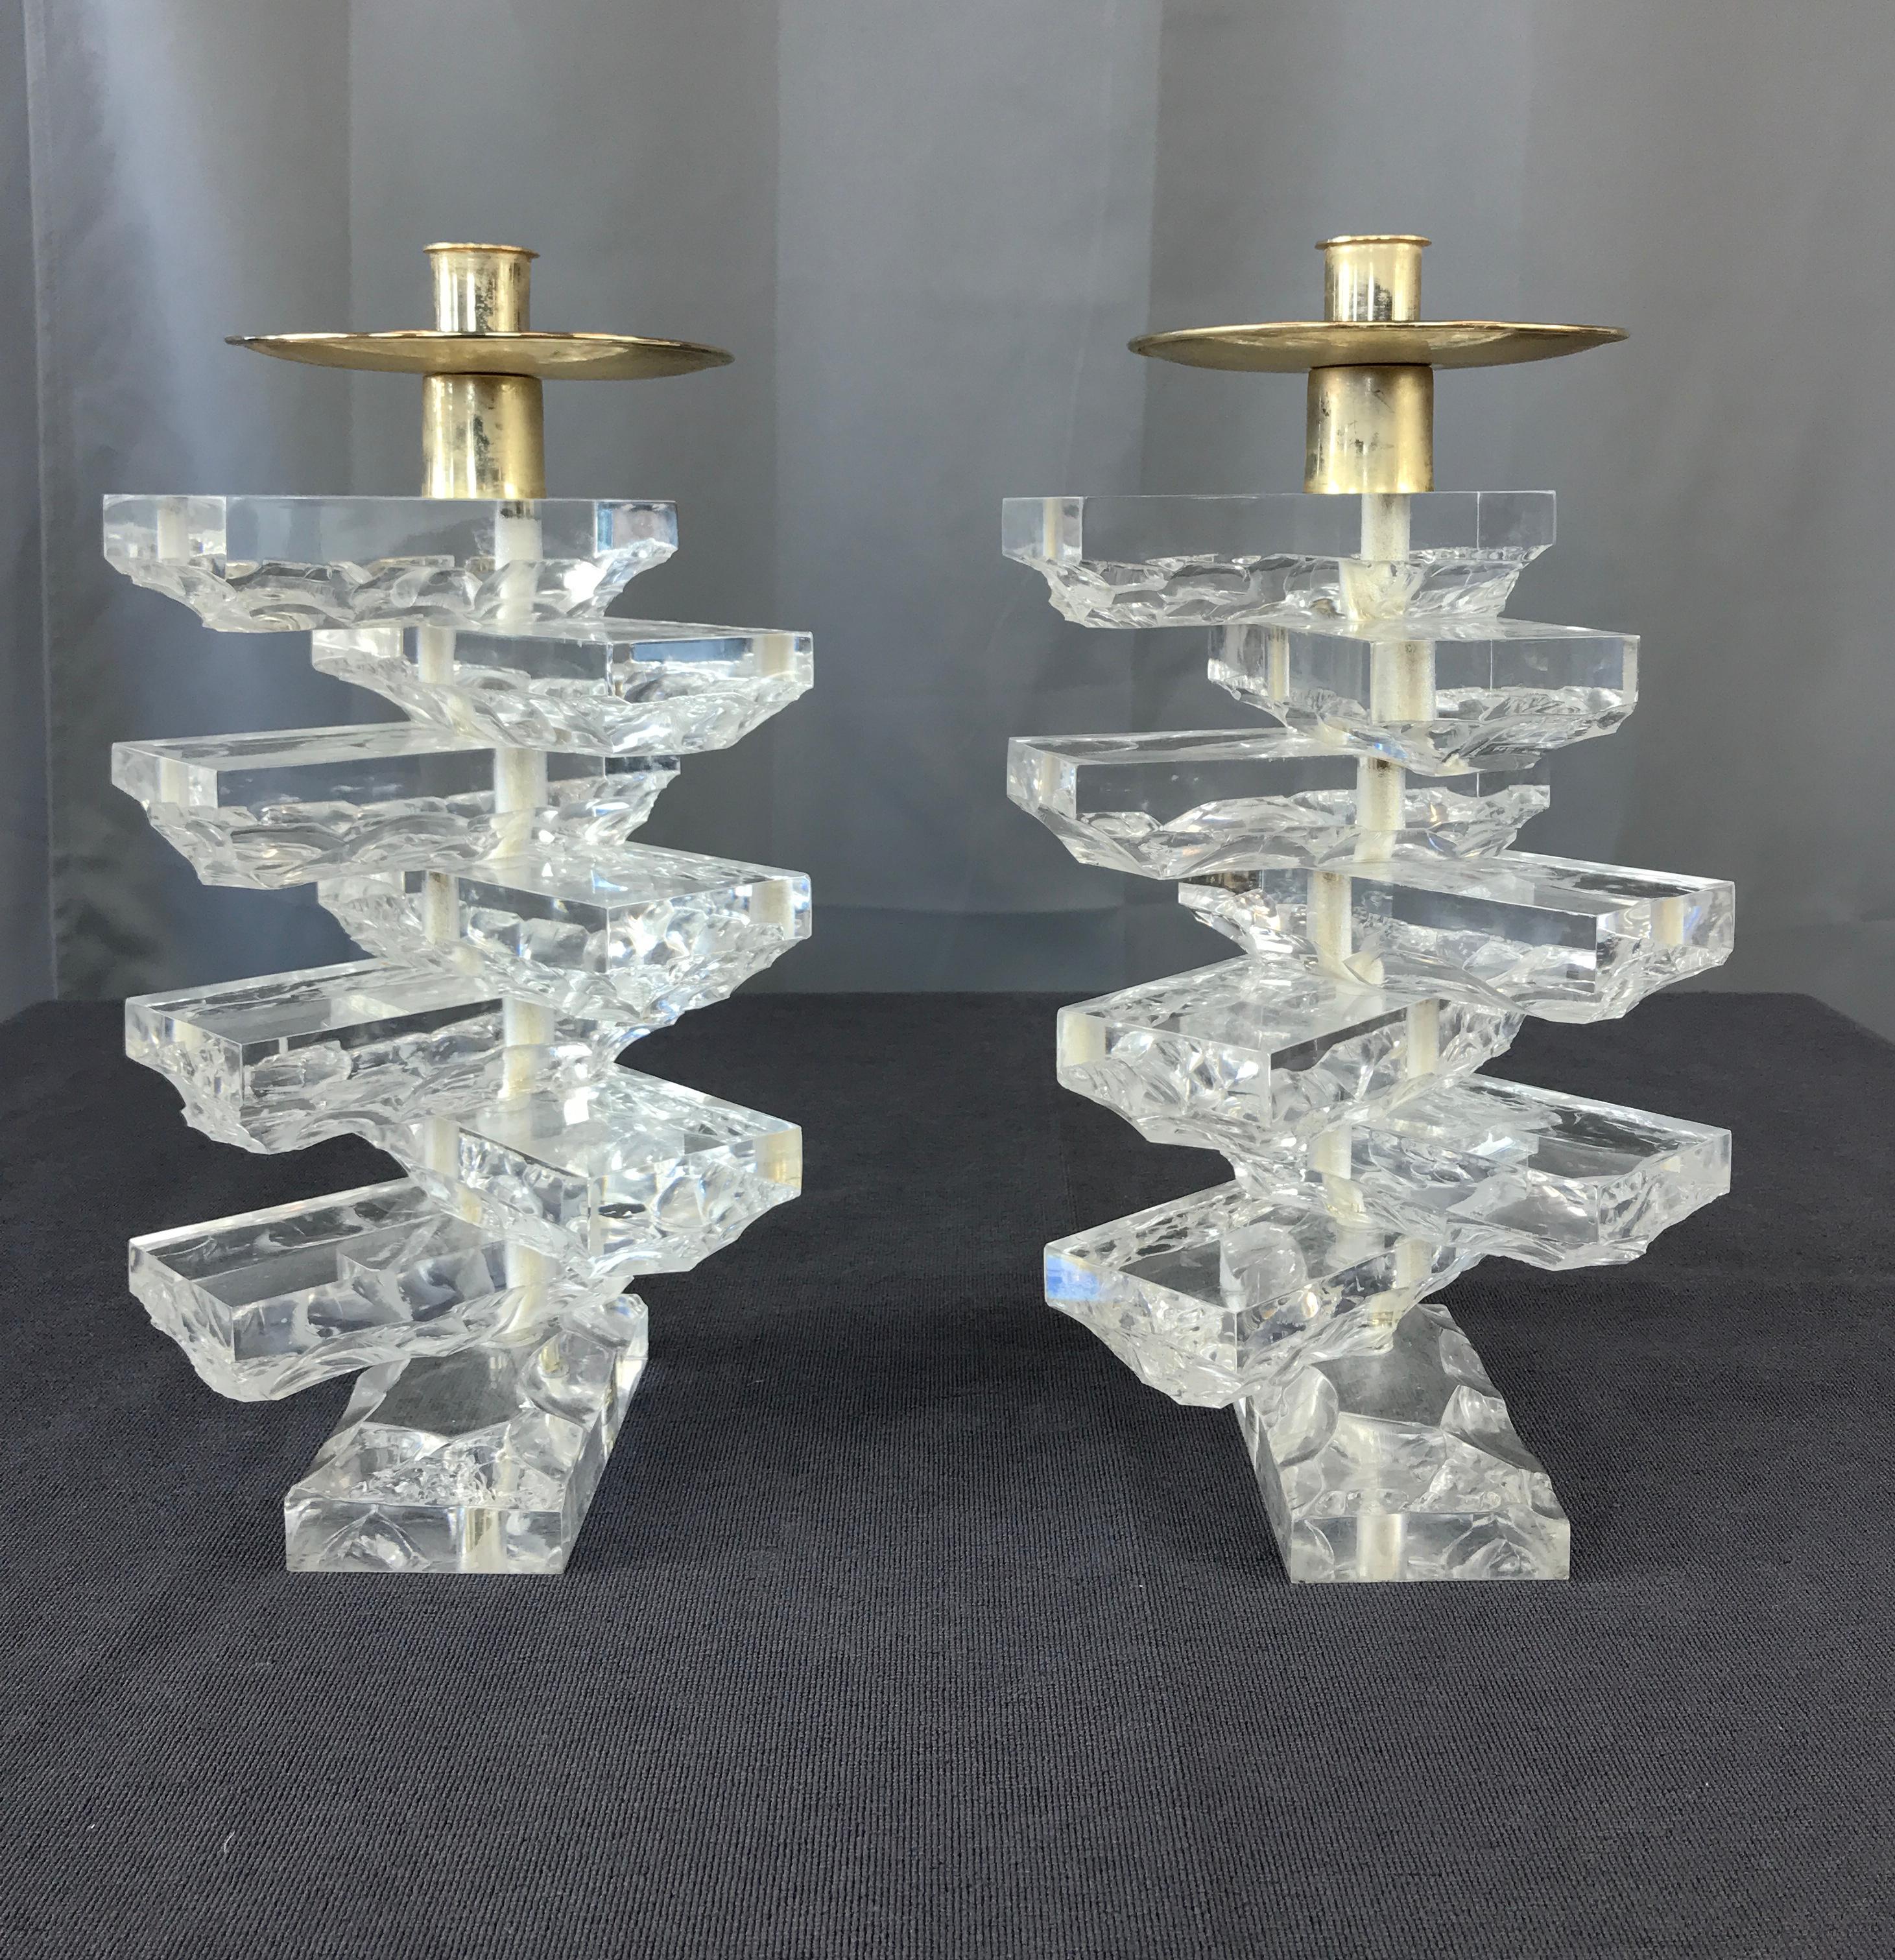 Fantastic pair of chunky and cut on one side Lucite block candleholders.
Eight rectangular blocks stacked one on top of the other ending with the holder.